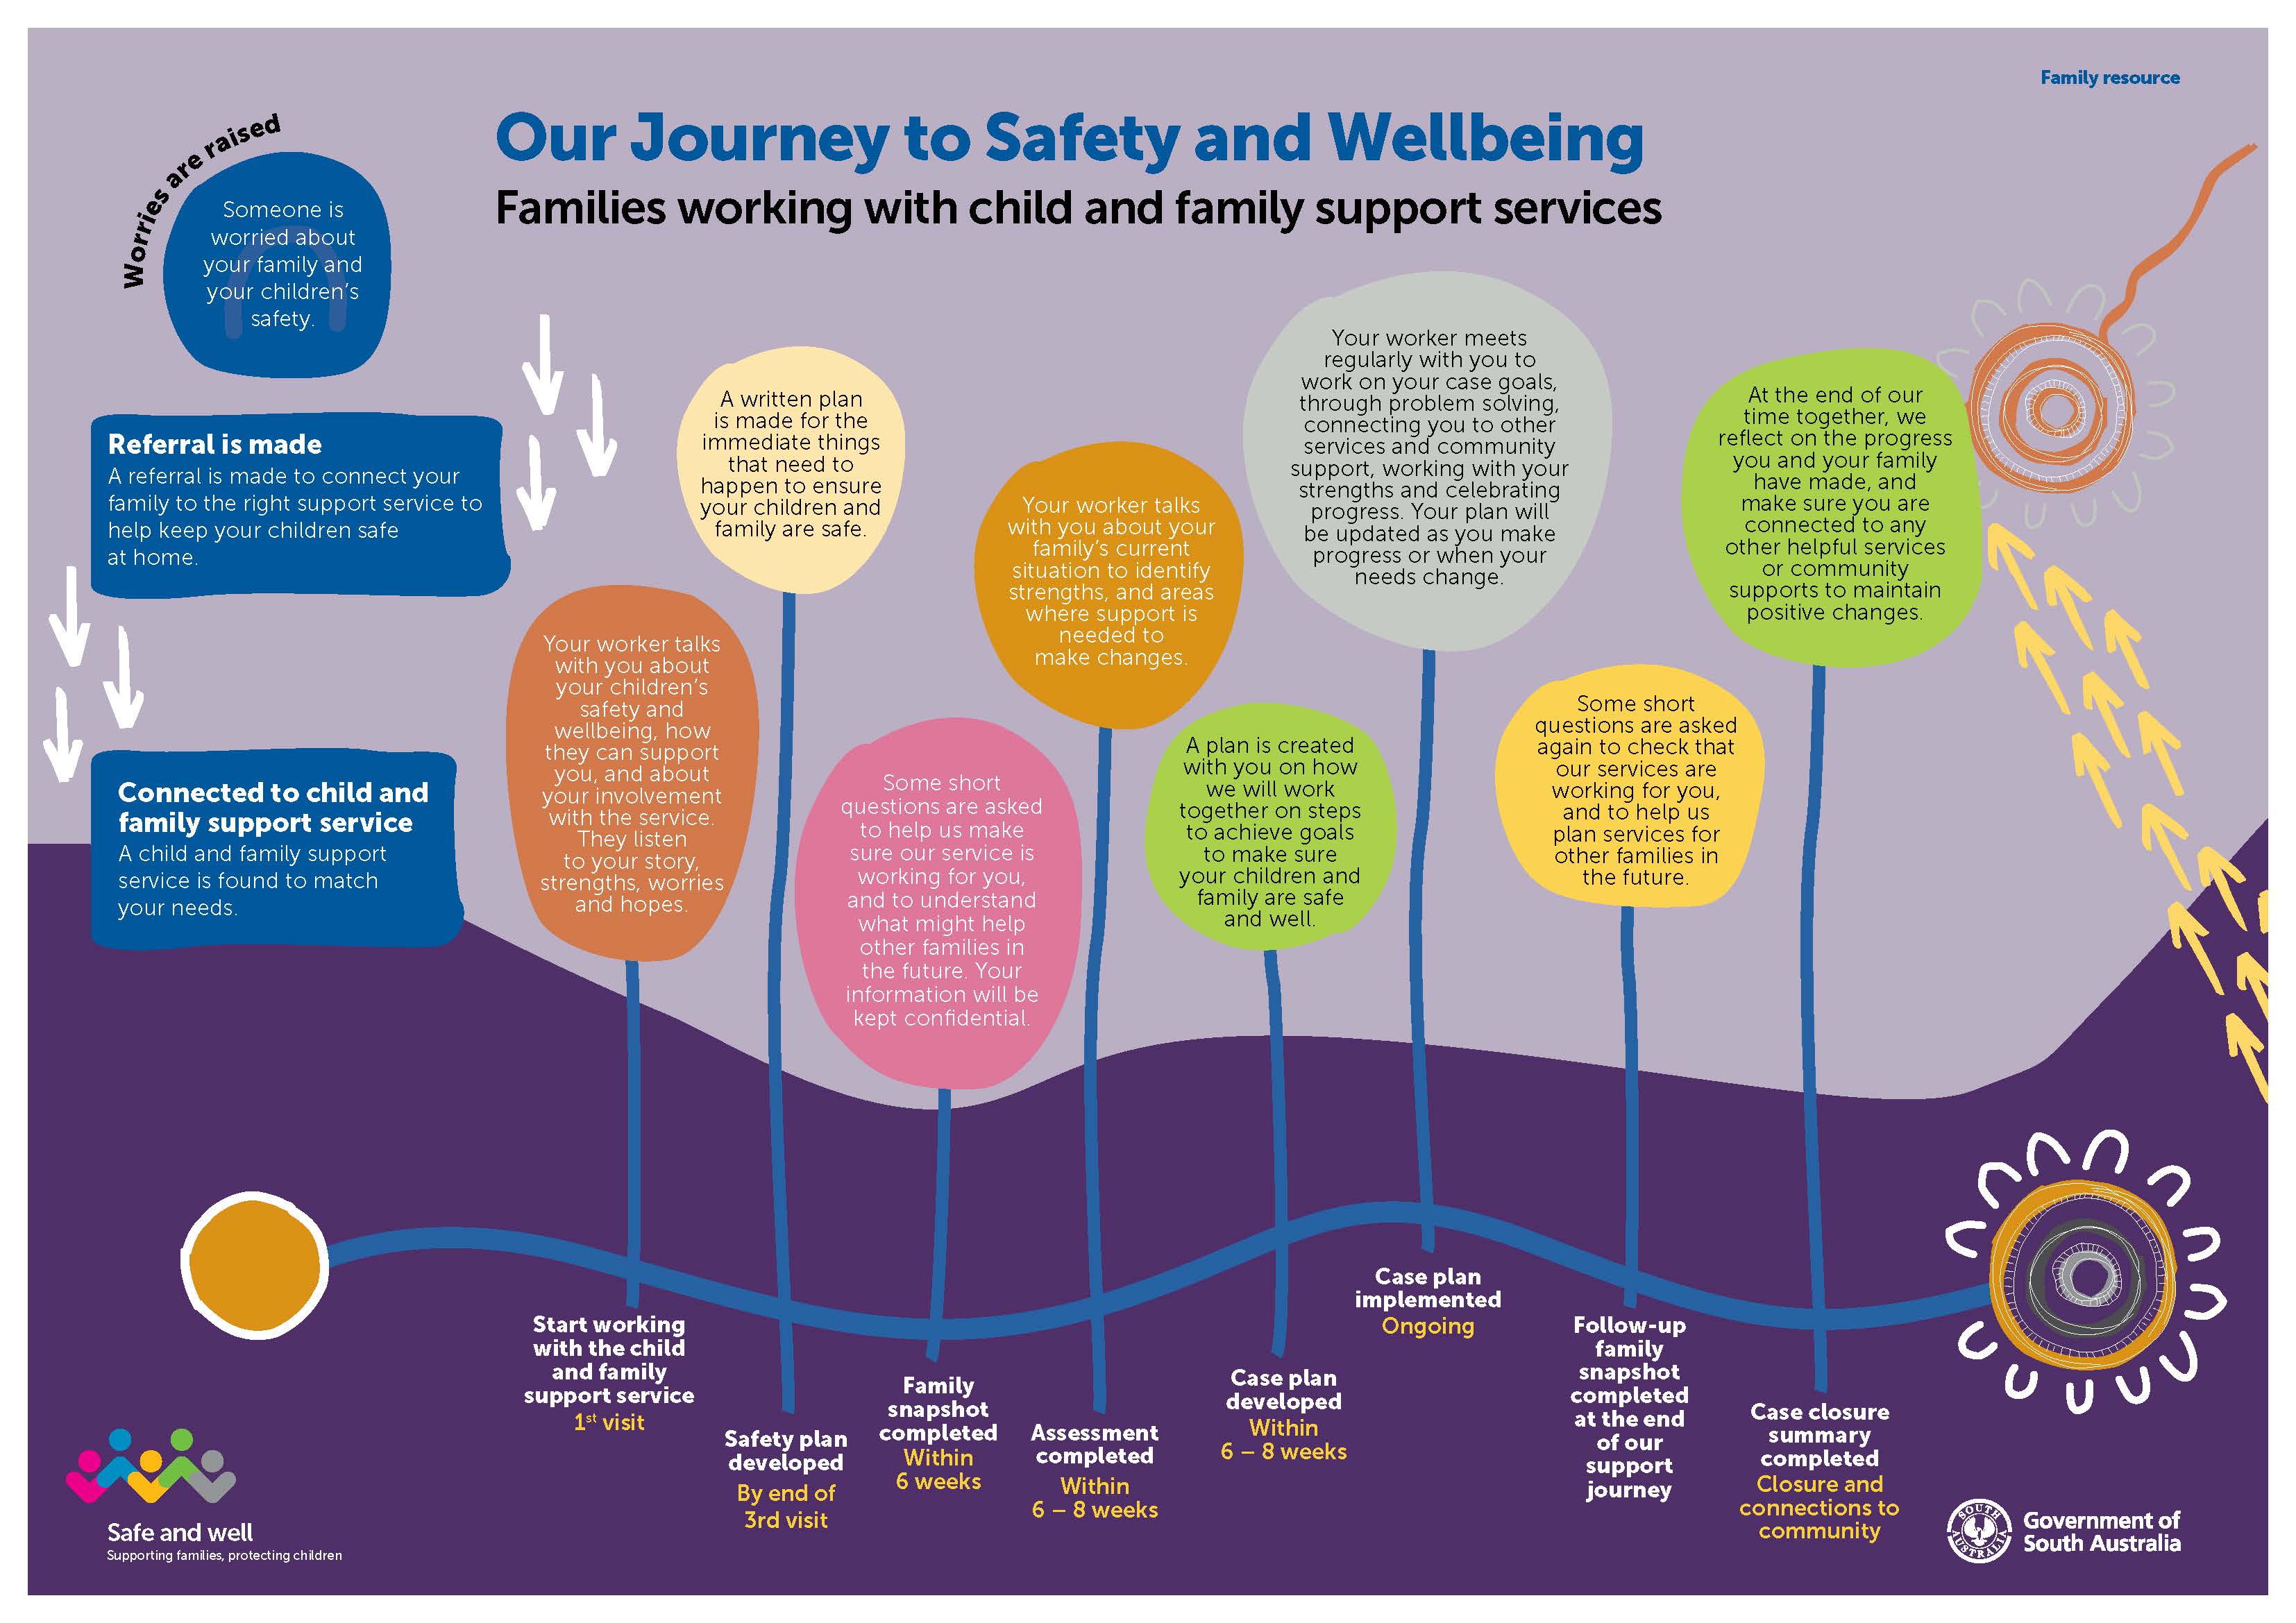 Our Journey to Safety and Wellbeing poster for families. There is a link a plain text description on this page.